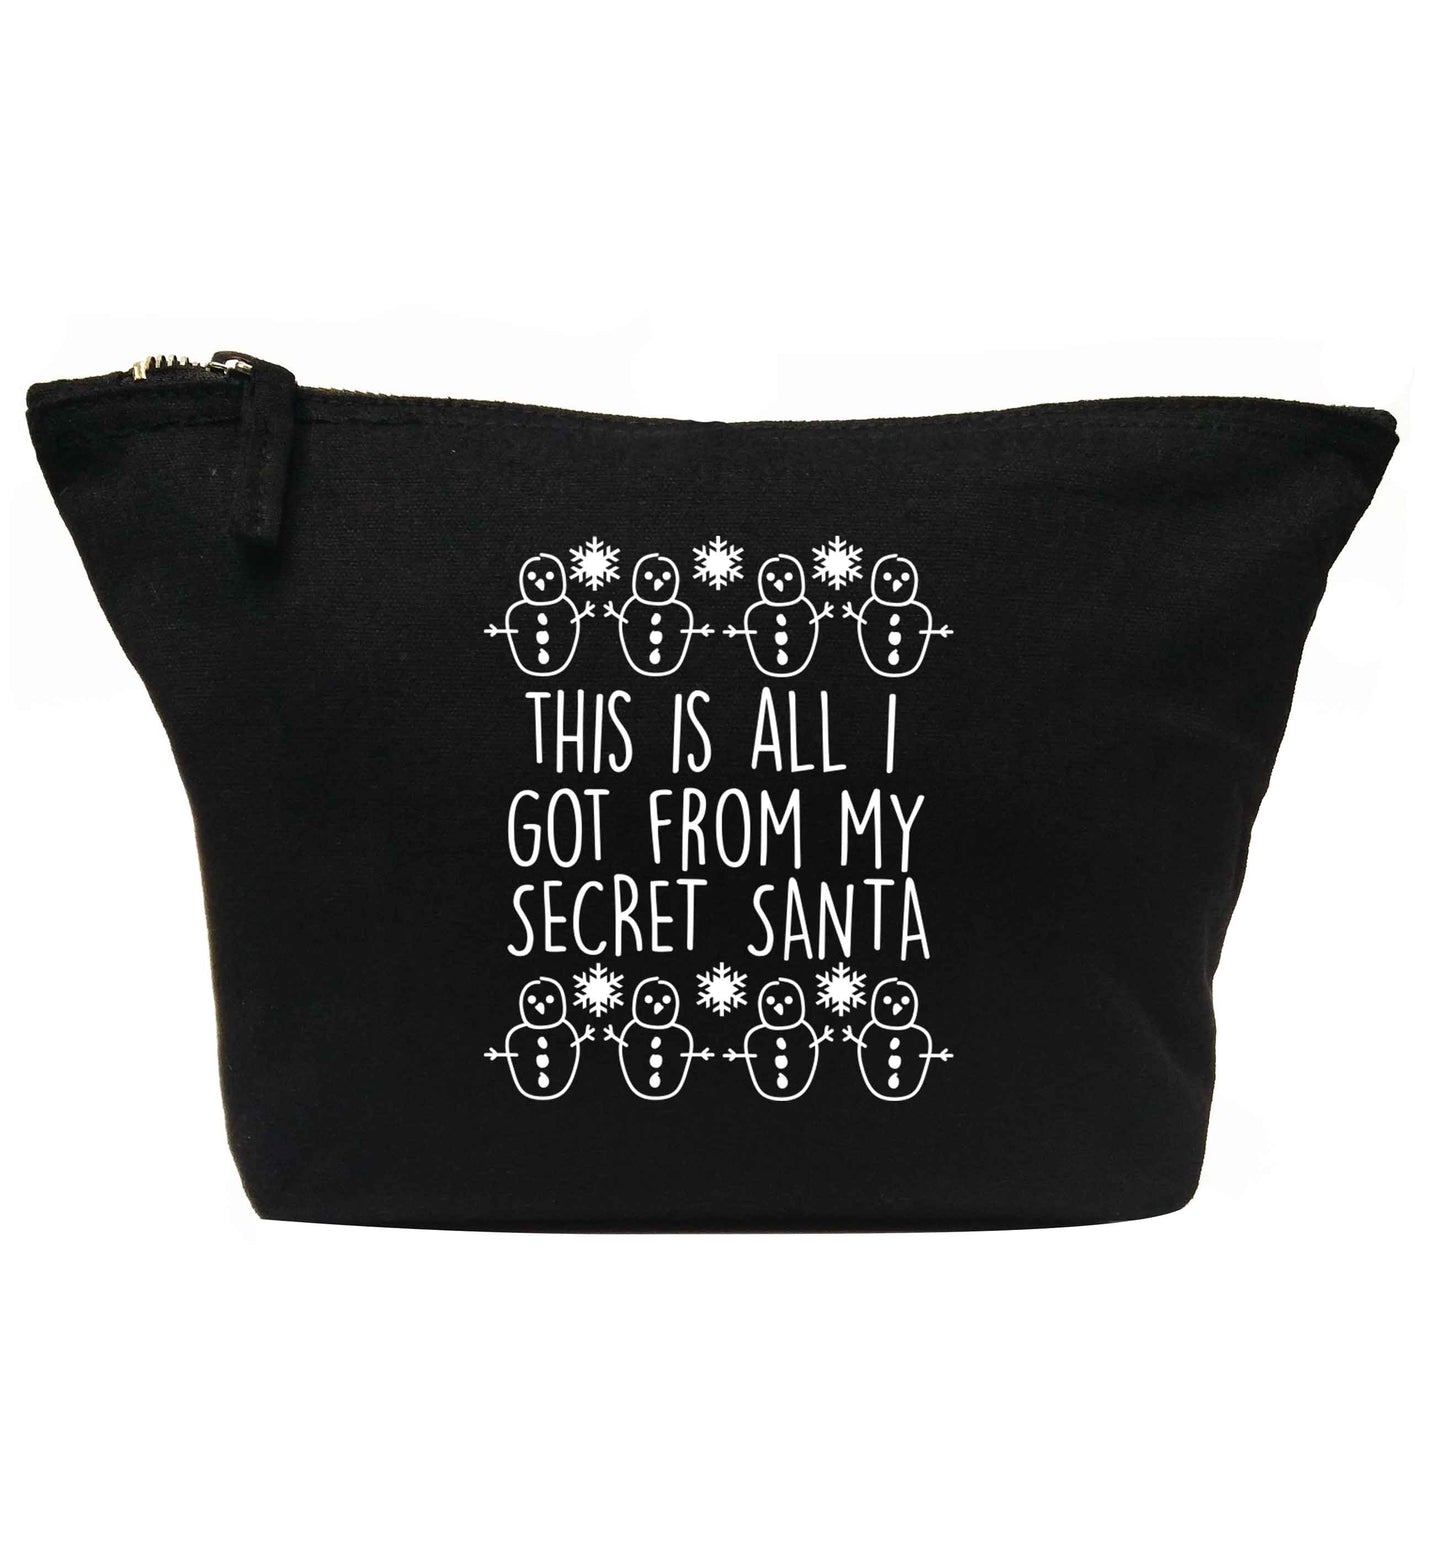 This is all I got from my secret Santa | Makeup / wash bag